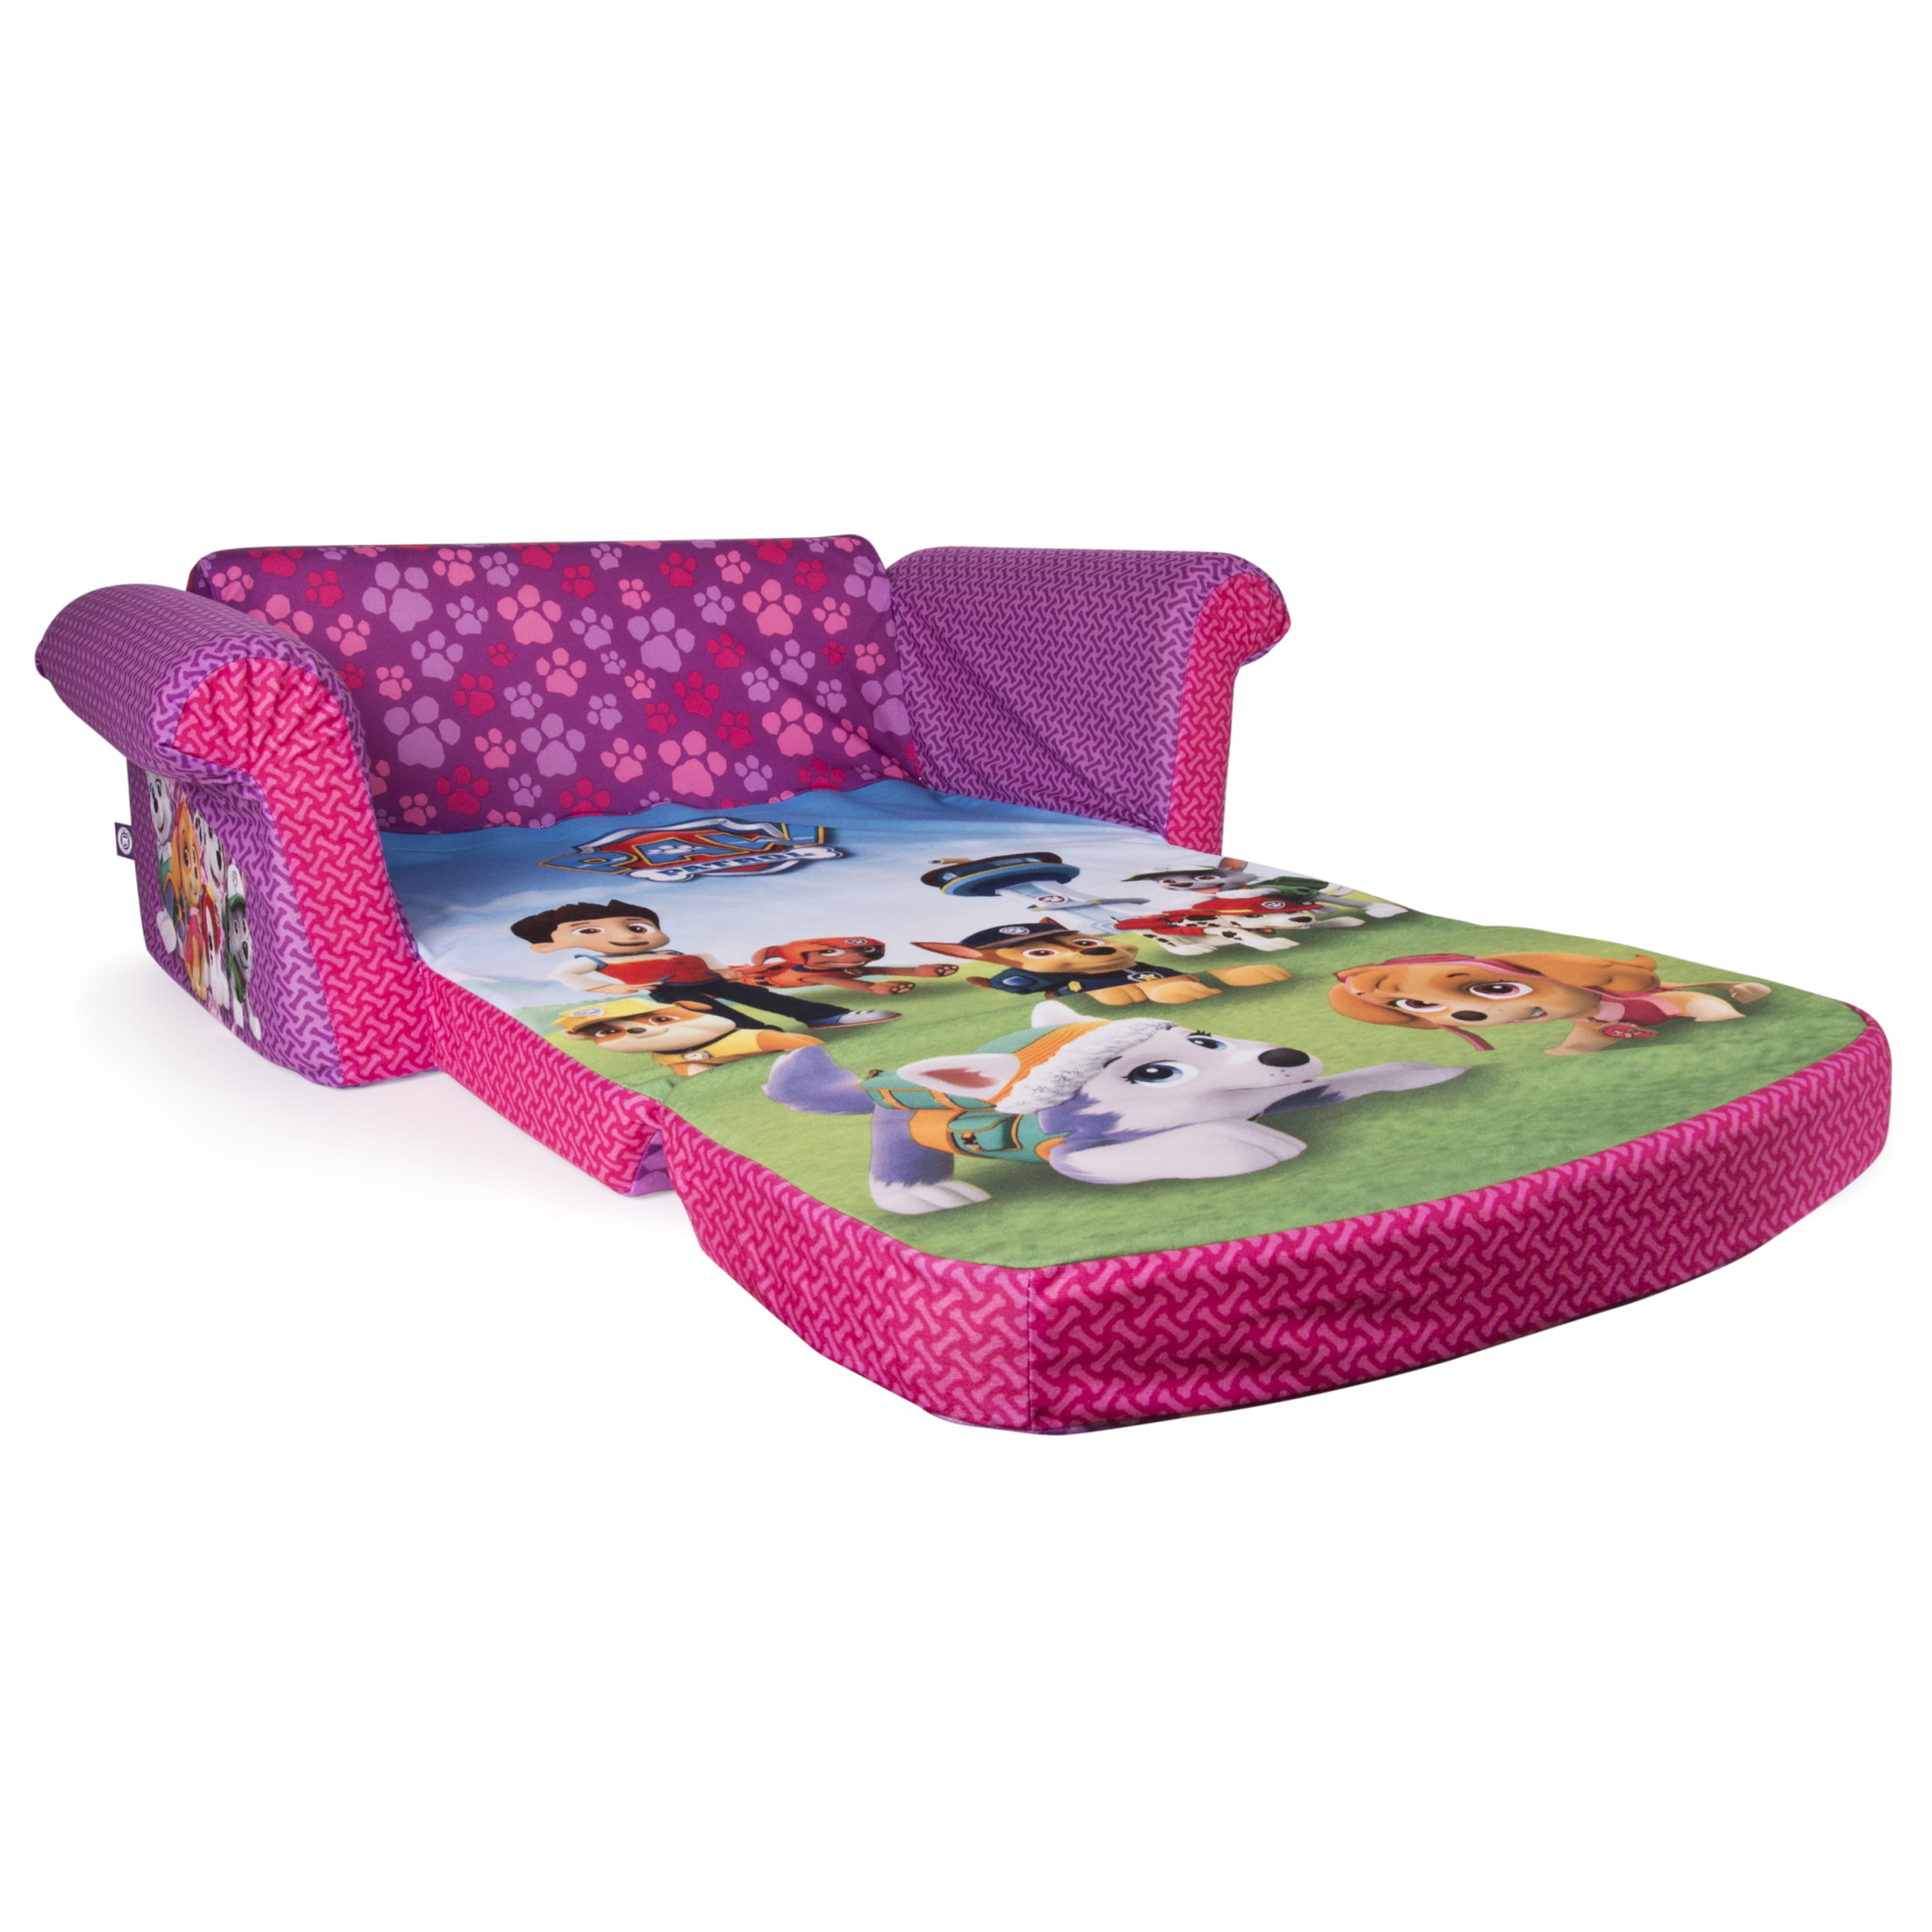 vampirina fold out couch